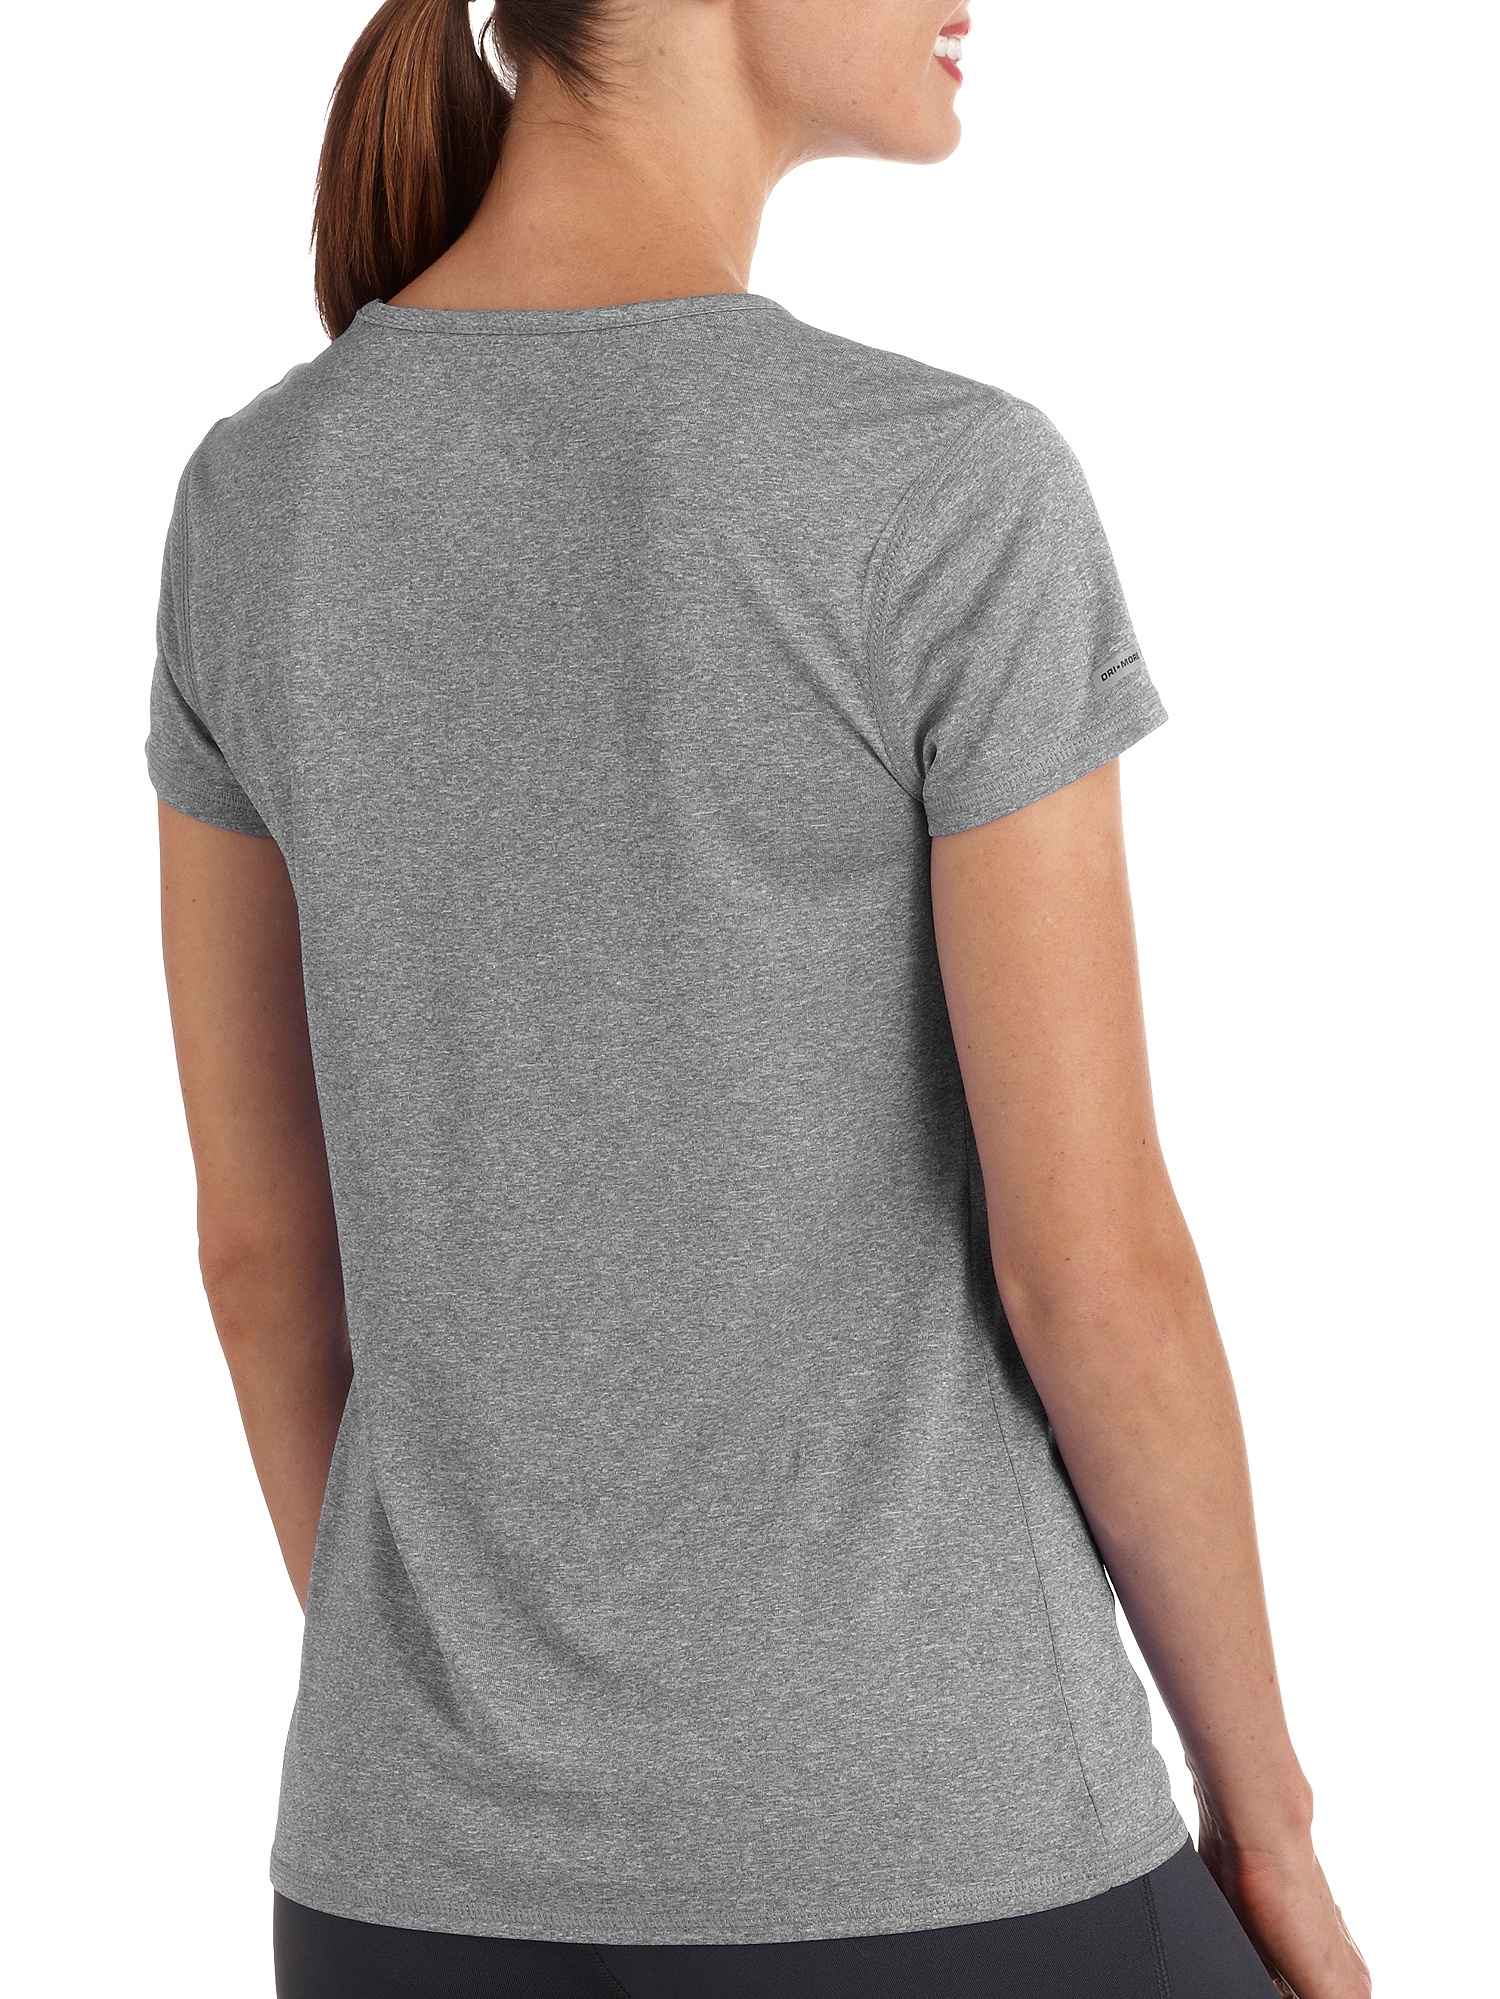 Danskin Now Women's Performance Tee With Flattering Seaming and Wicking 2-Pack - image 4 of 4